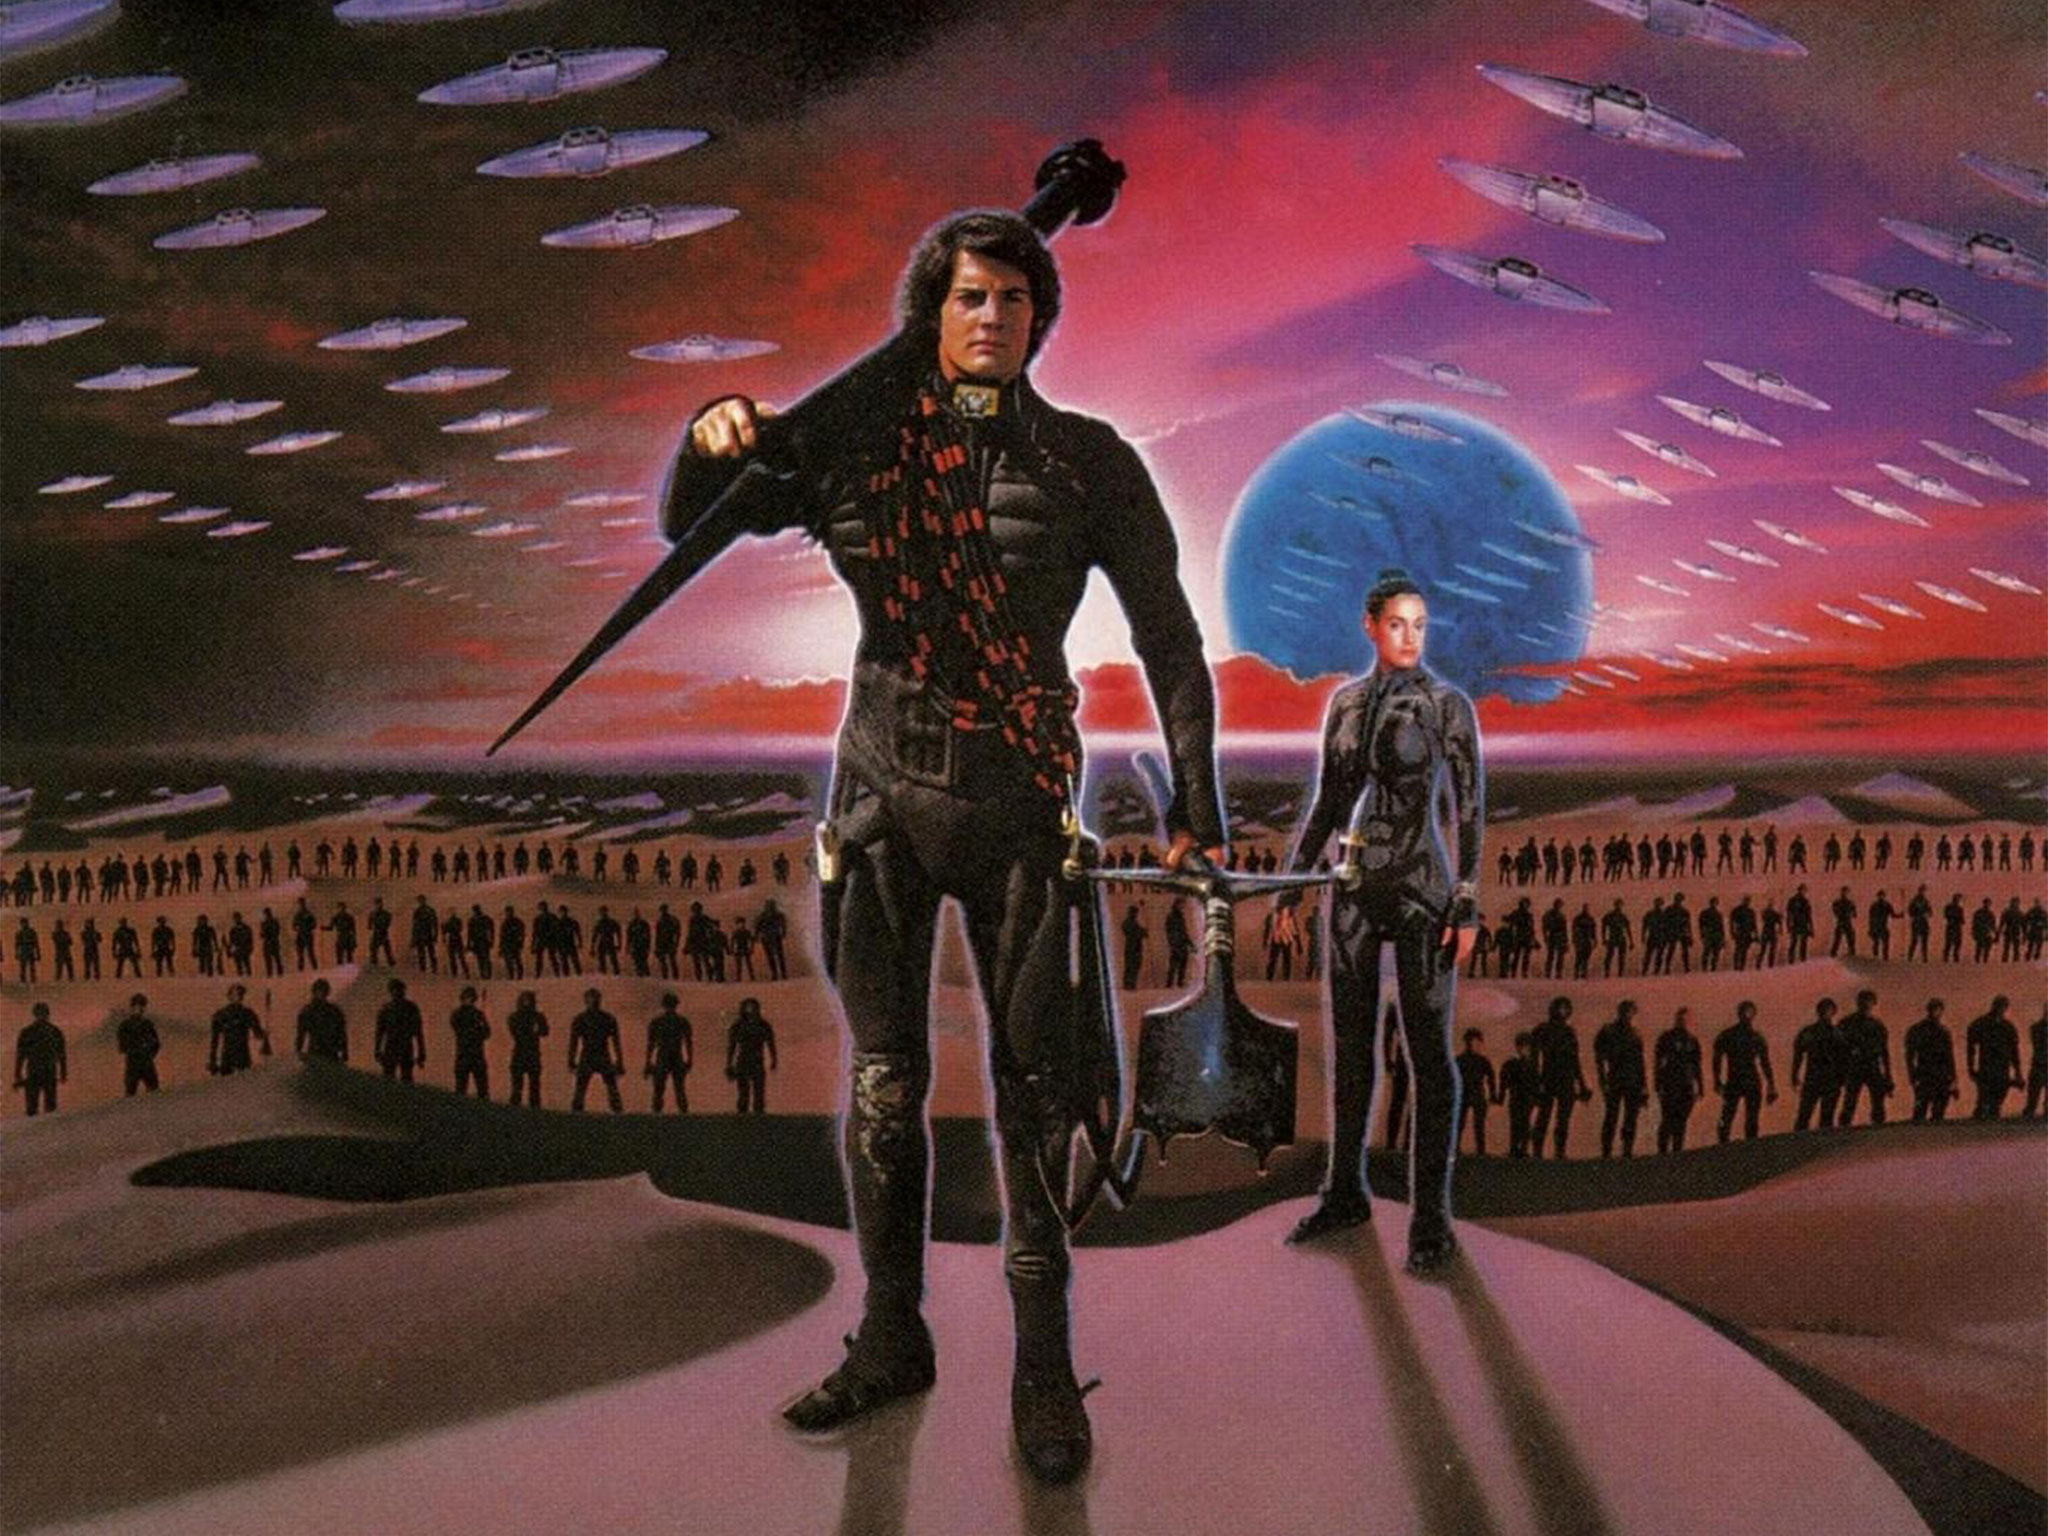 Review 5: Dune